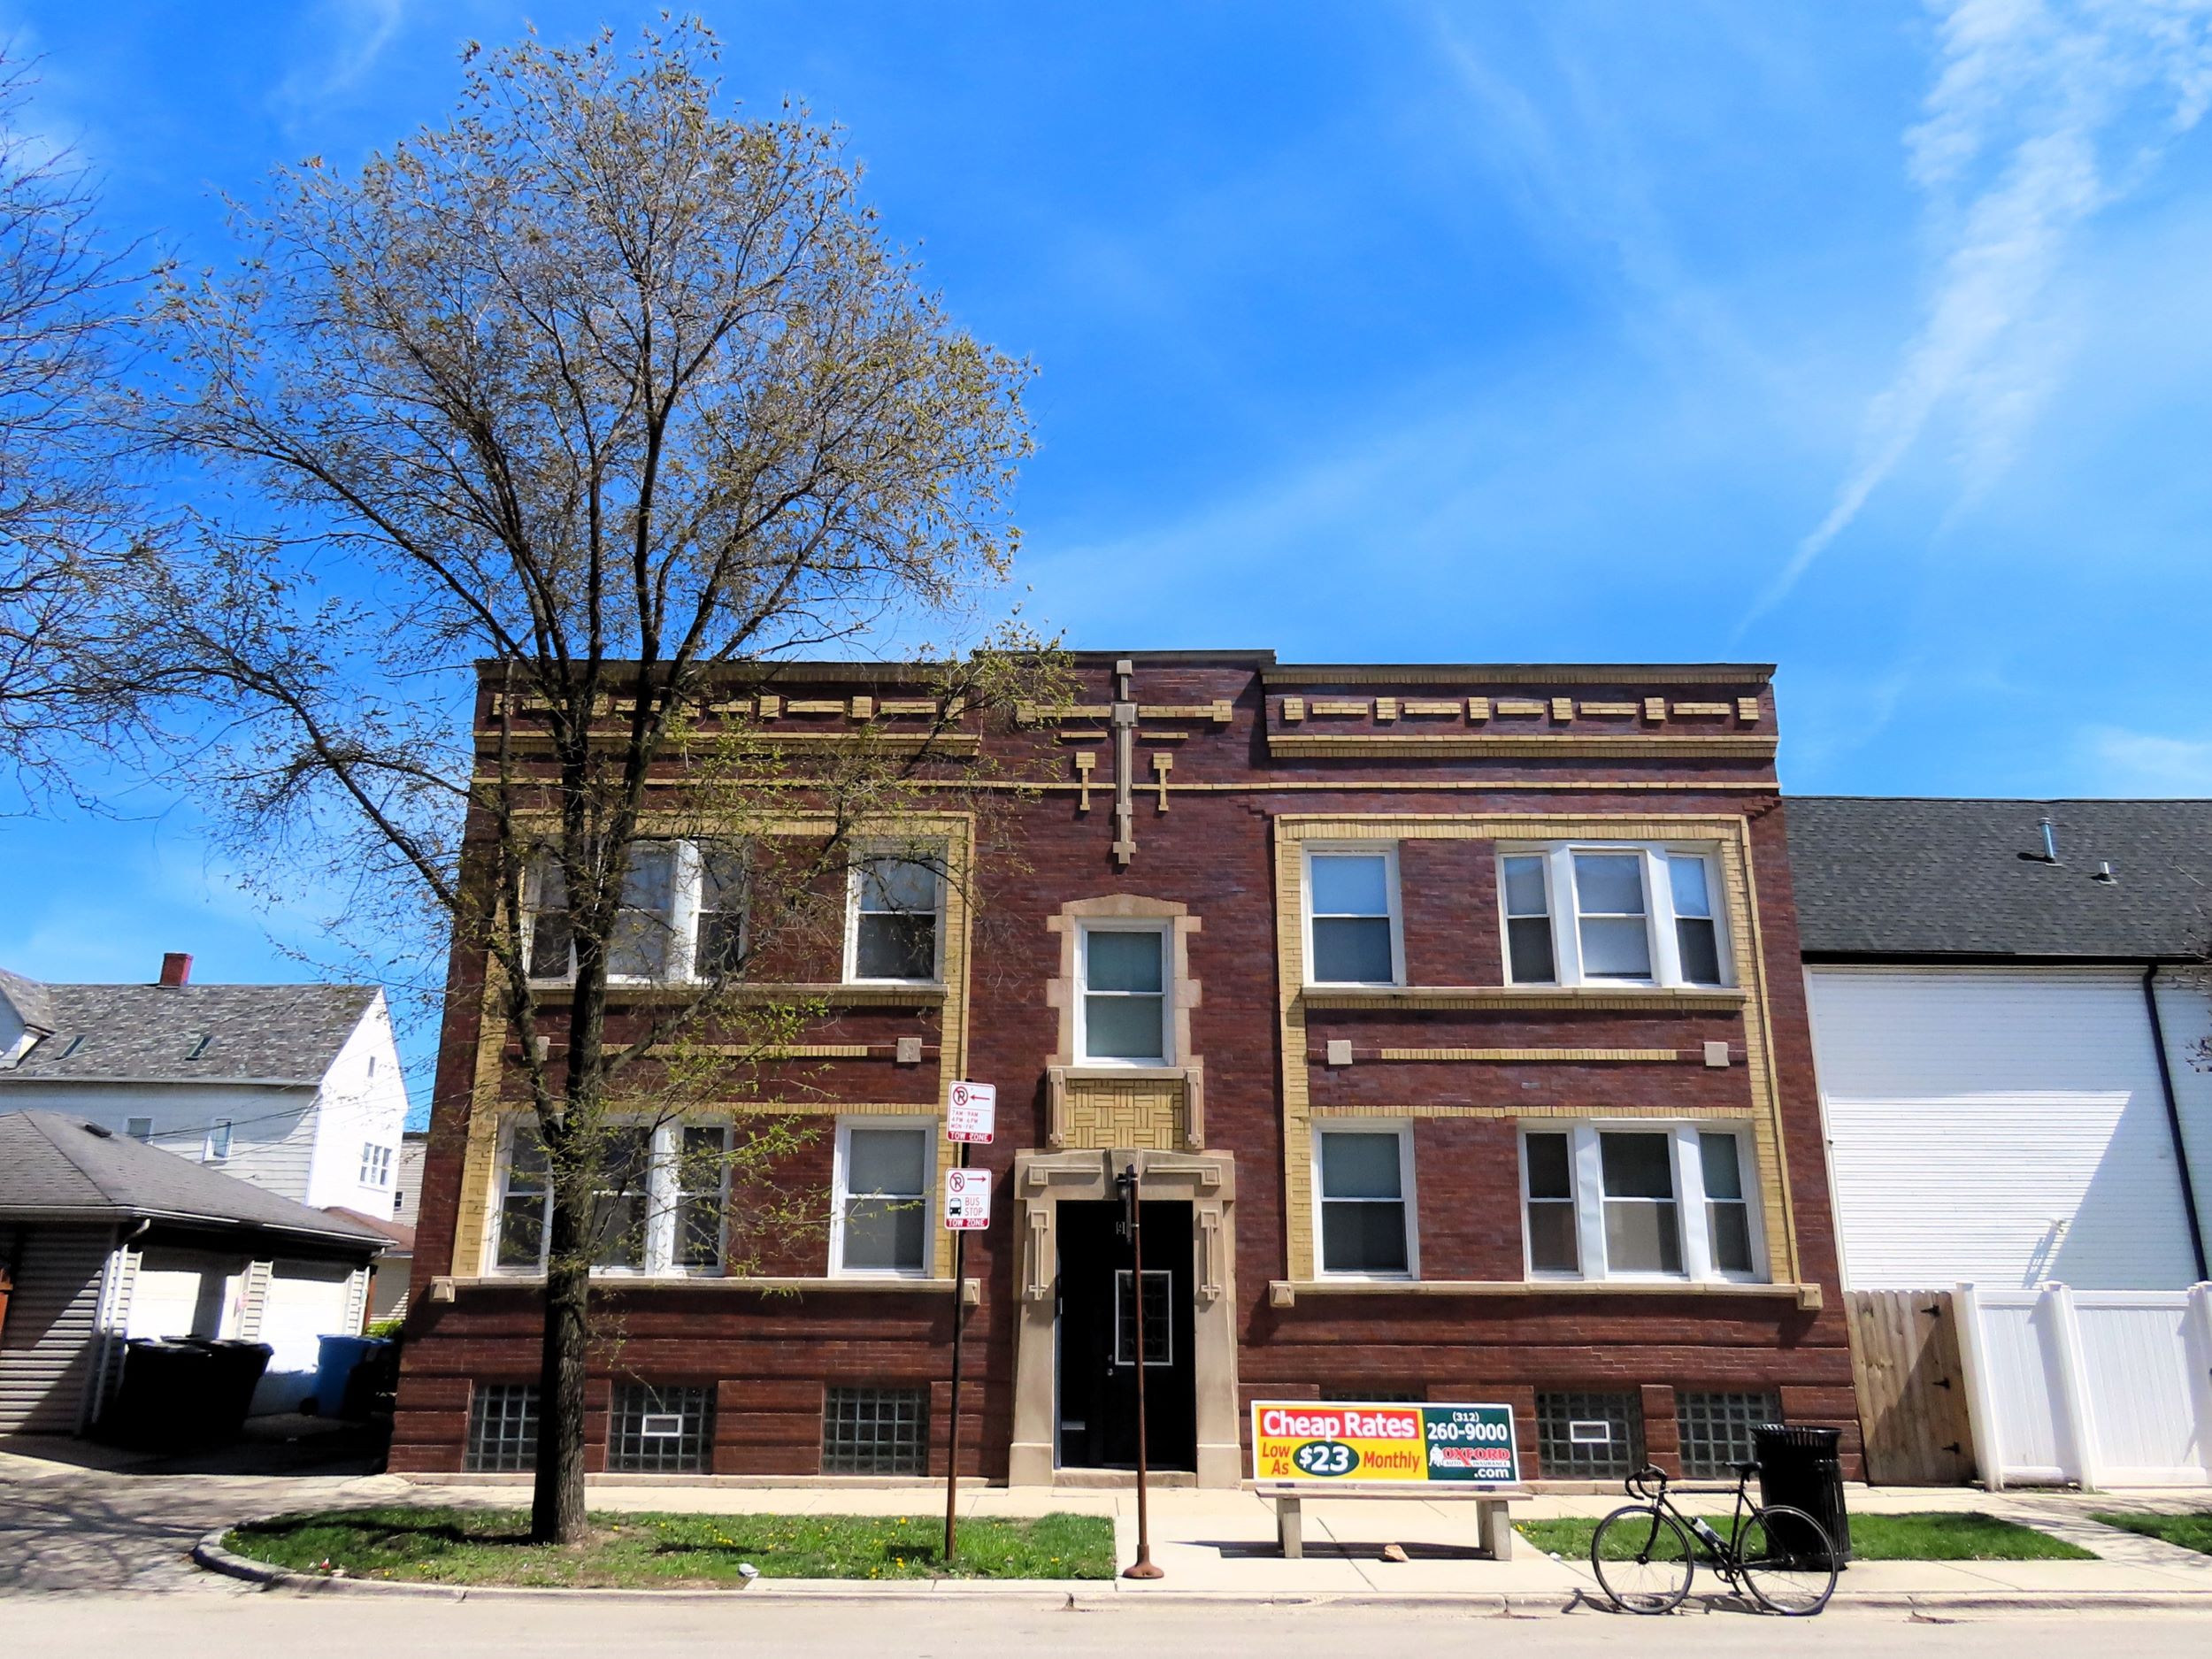 A tour bicycle standing at front of an early 1900s brown brick double lot two story apartment building with an ornate central limestone entry and a yellow brick accented façade.